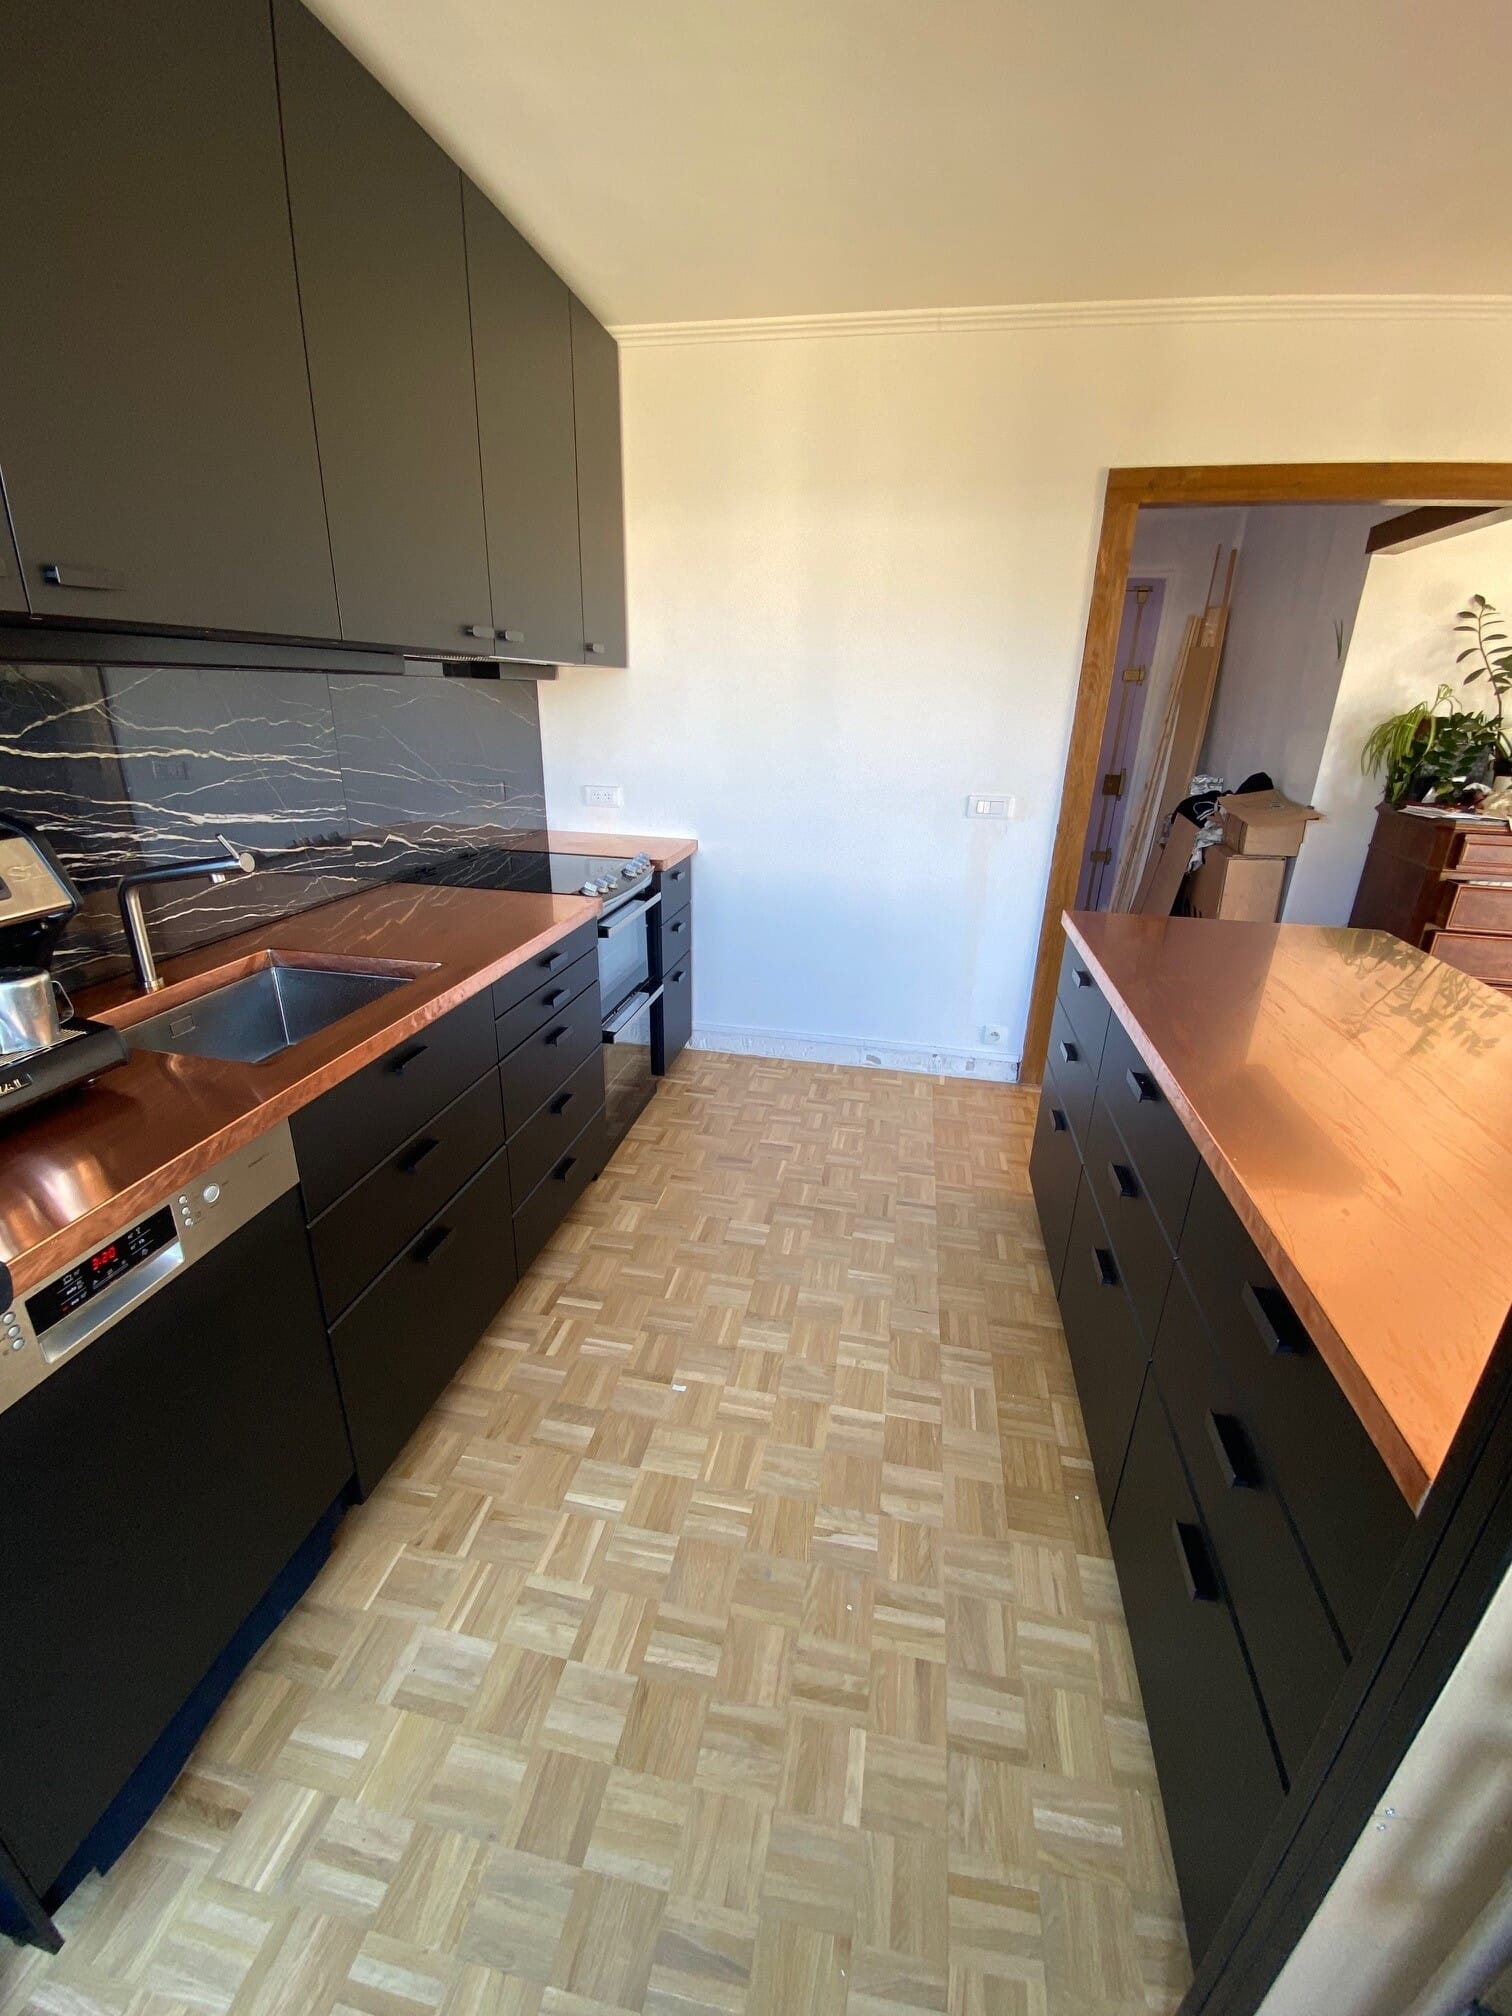 Copper Worktops and Work Surfaces For Your Kitchen Are For Sale at UKAA